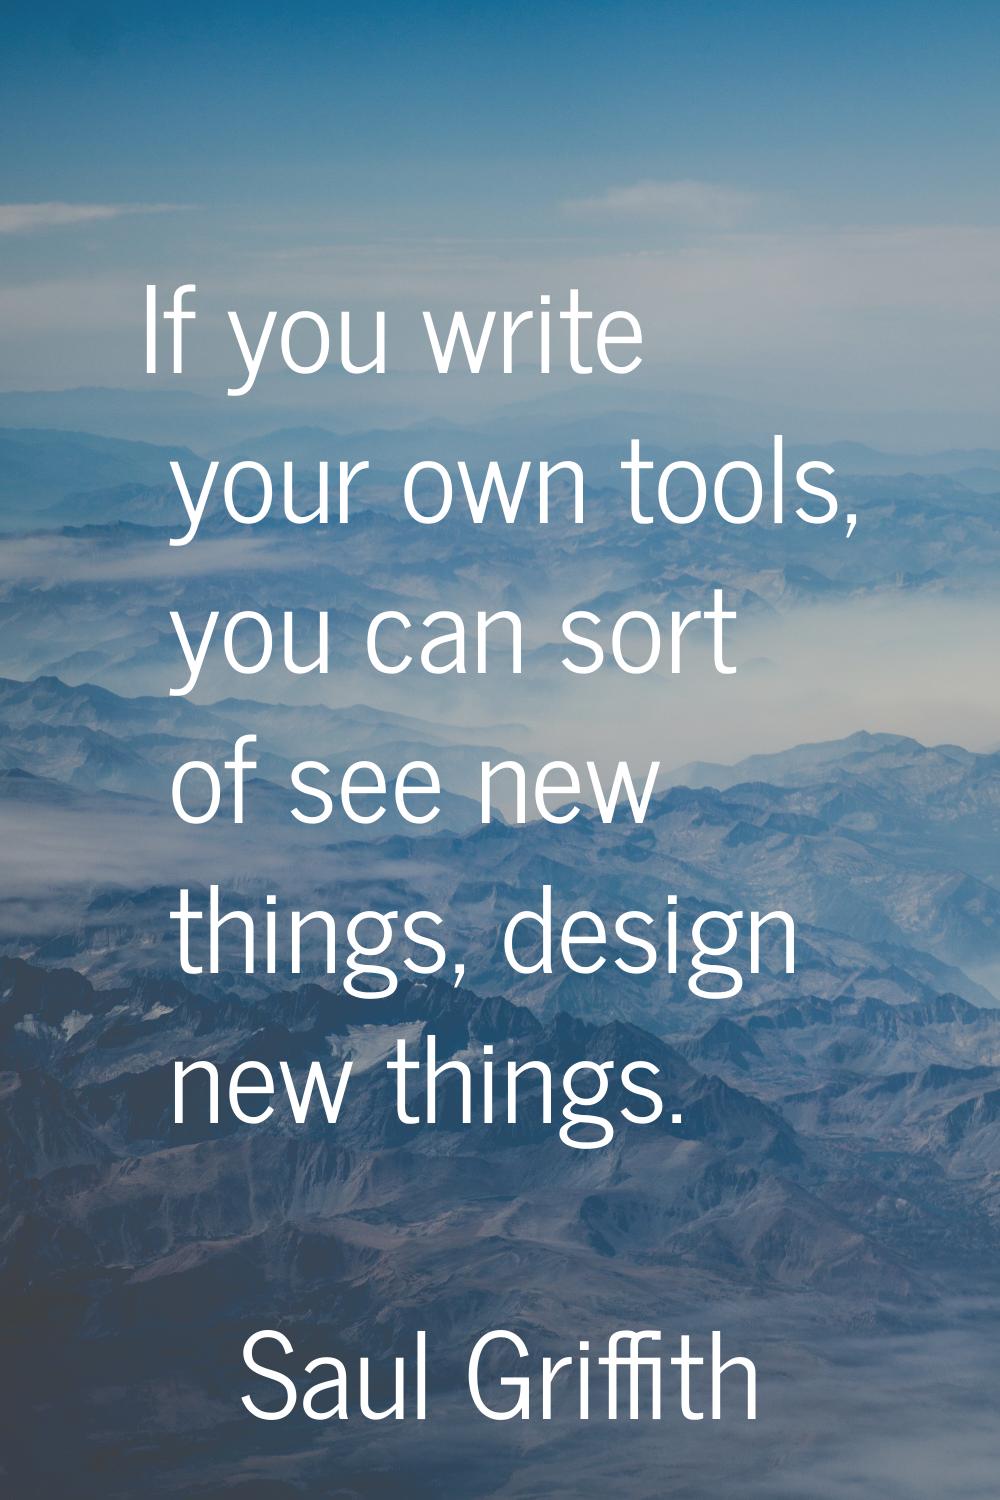 If you write your own tools, you can sort of see new things, design new things.